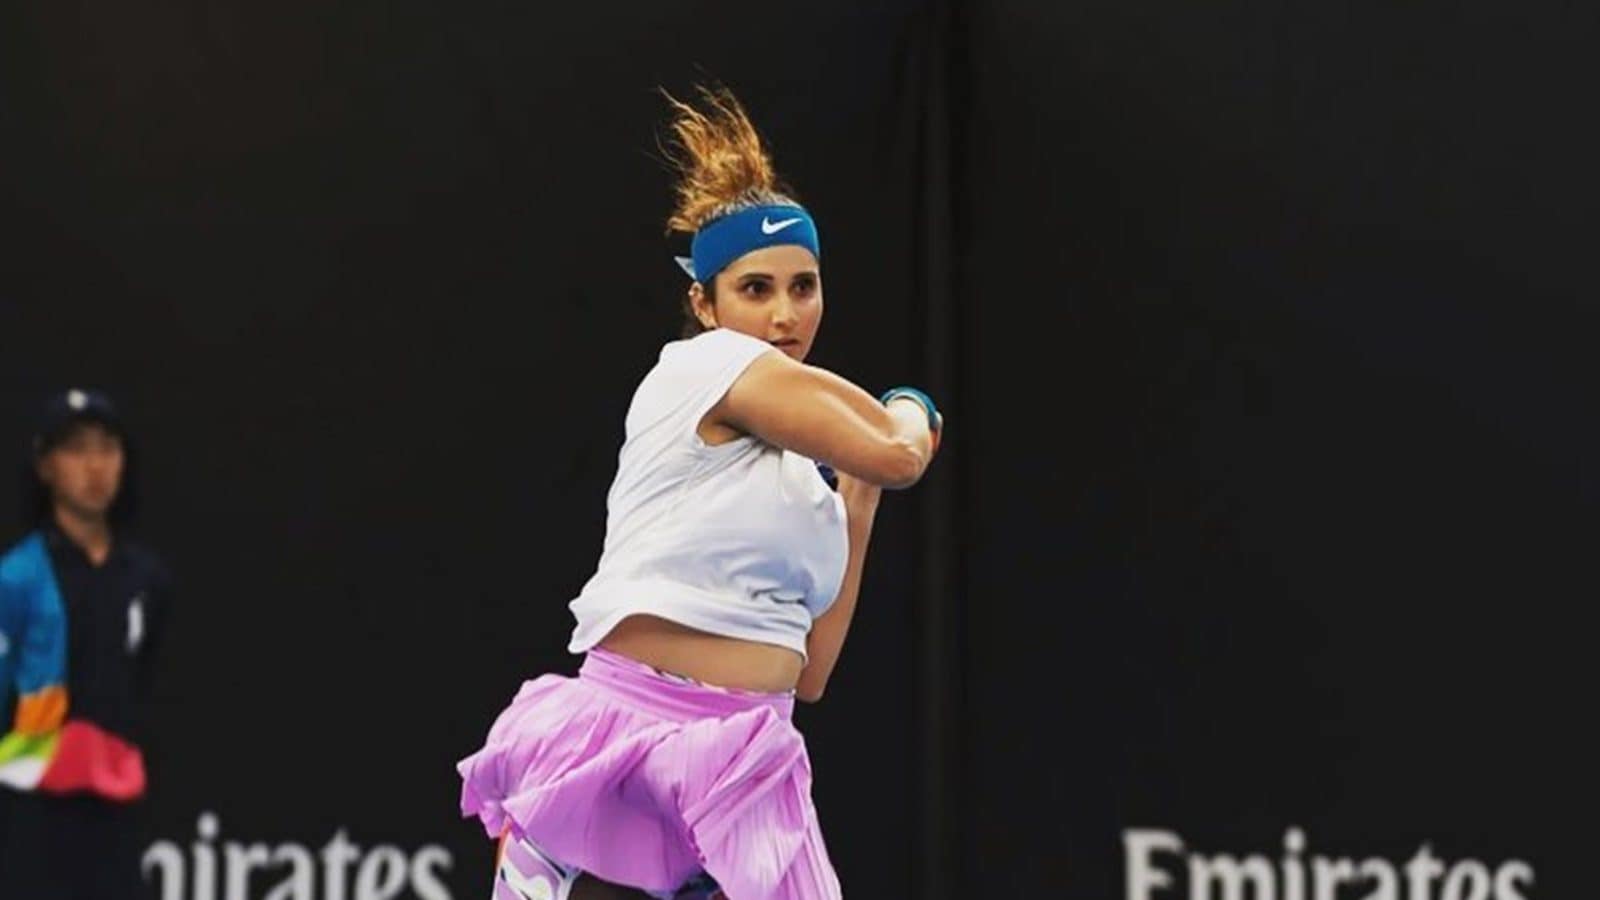 Sania Mirza Original Sex Videos - Everyone Should Have Freedom to be Different', Feels Indian Tennis Star Sania  Mirza - News18